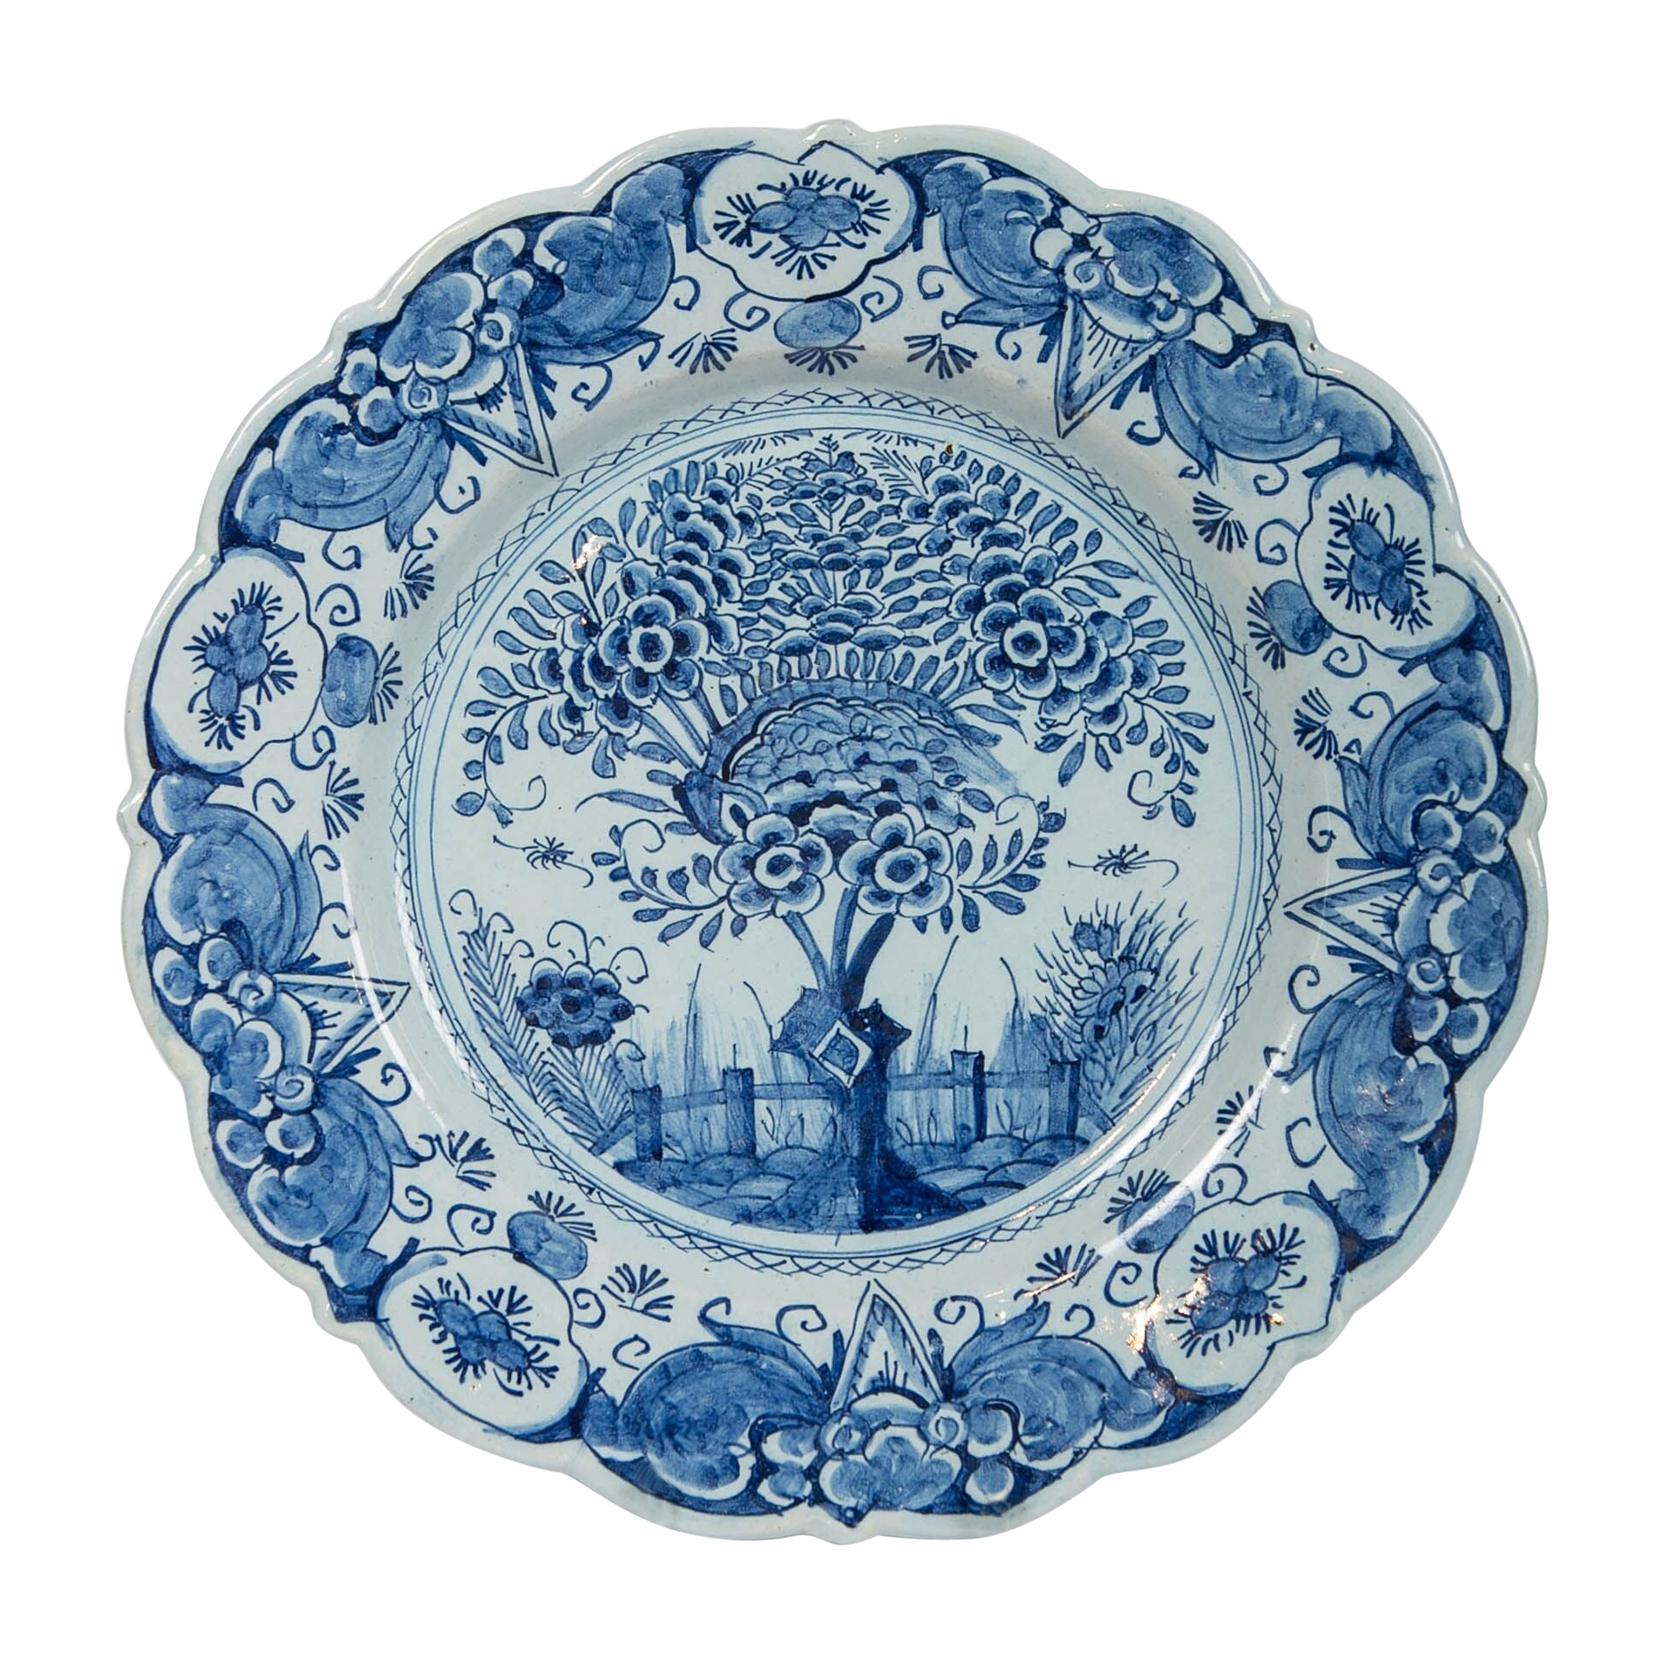 Delft Blue and White Charger Hand Painted Made by De Bijl 'The Axe', circa 1770